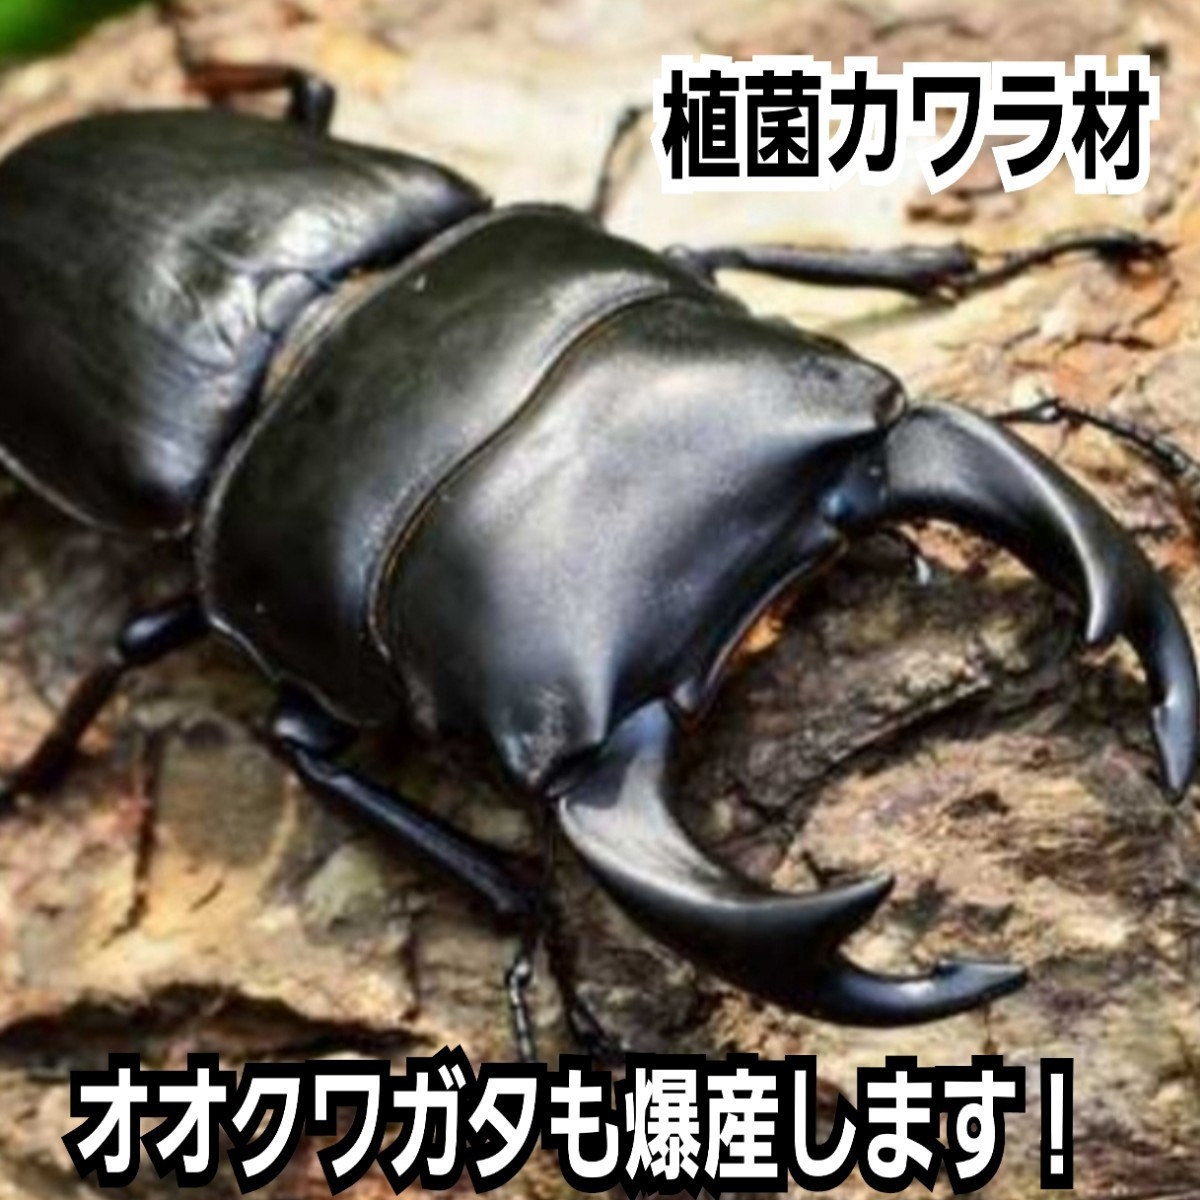  stag beetle . production egg make do if kore. strongest.! leather la.. production egg tree mold . raw . not!. water . un- necessary.! diameter 12~15 centimeter. extra-large size. 